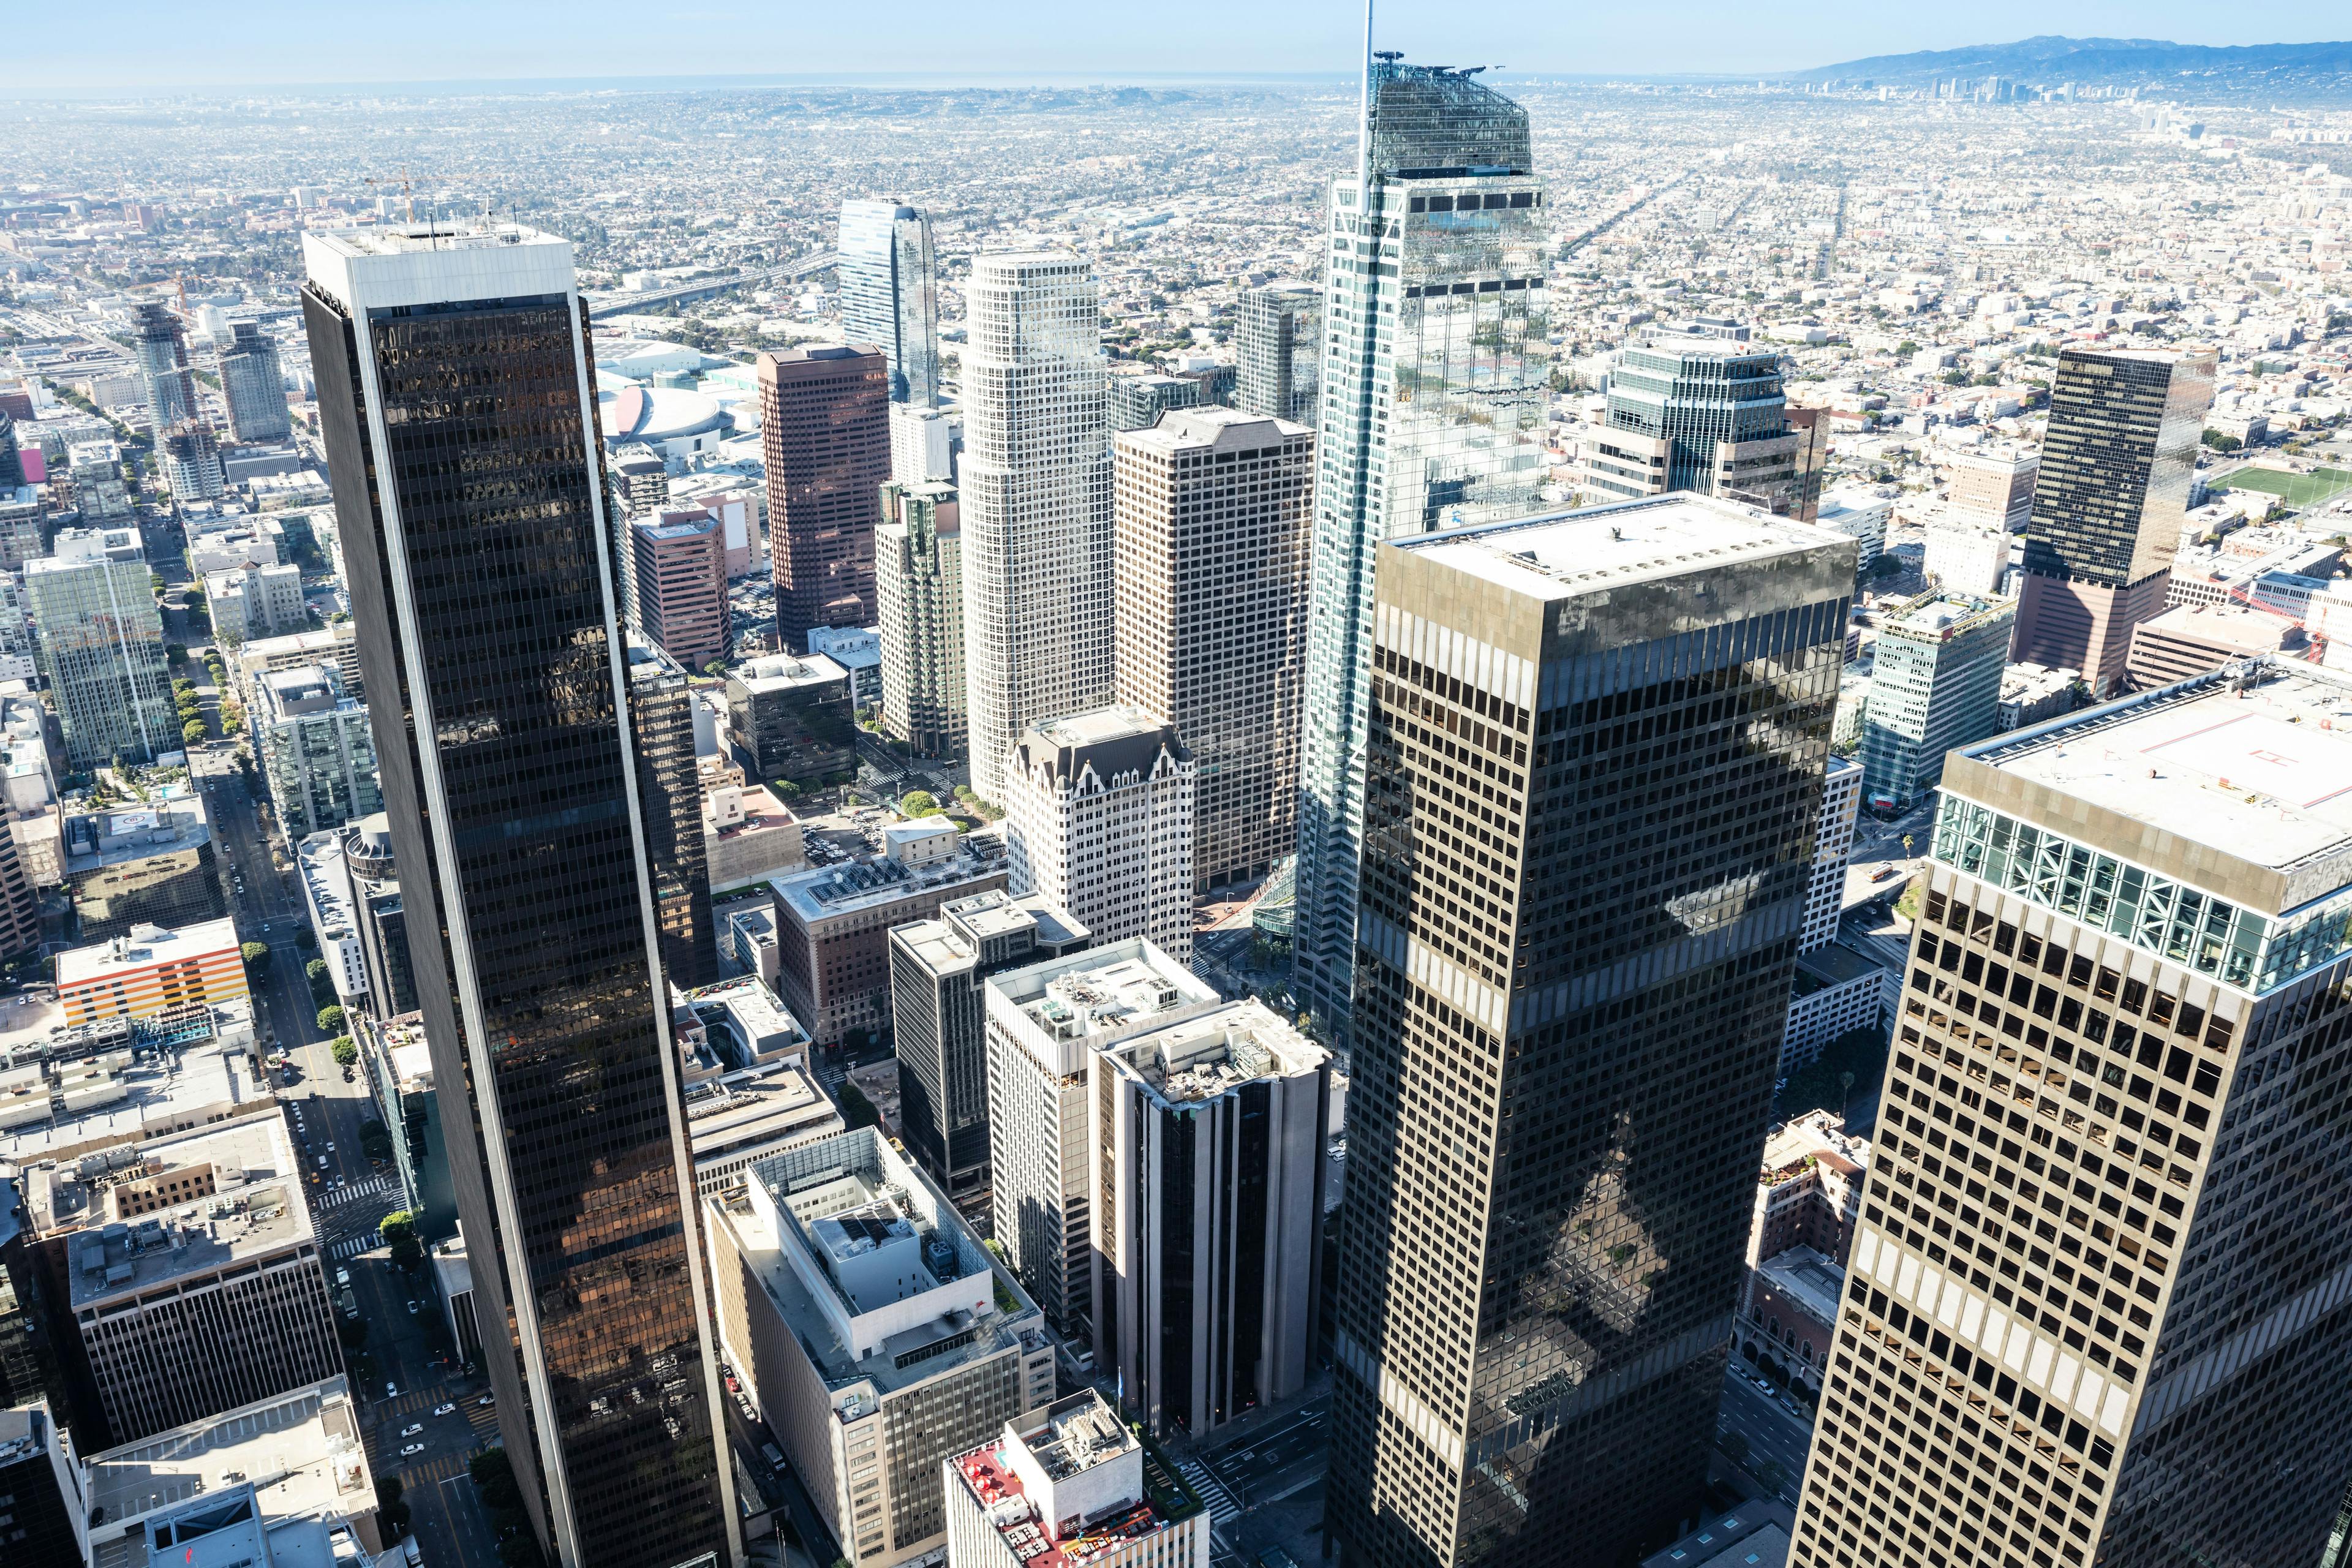 The Los Angeles City Council has approved a measure that would allow voters to impose a ceiling on hospital executive compensation. Hospitals say the measure would make it more difficult to recruit and keep top leaders. (Image credit: ©Andrey Popov - stock.adobe.com)